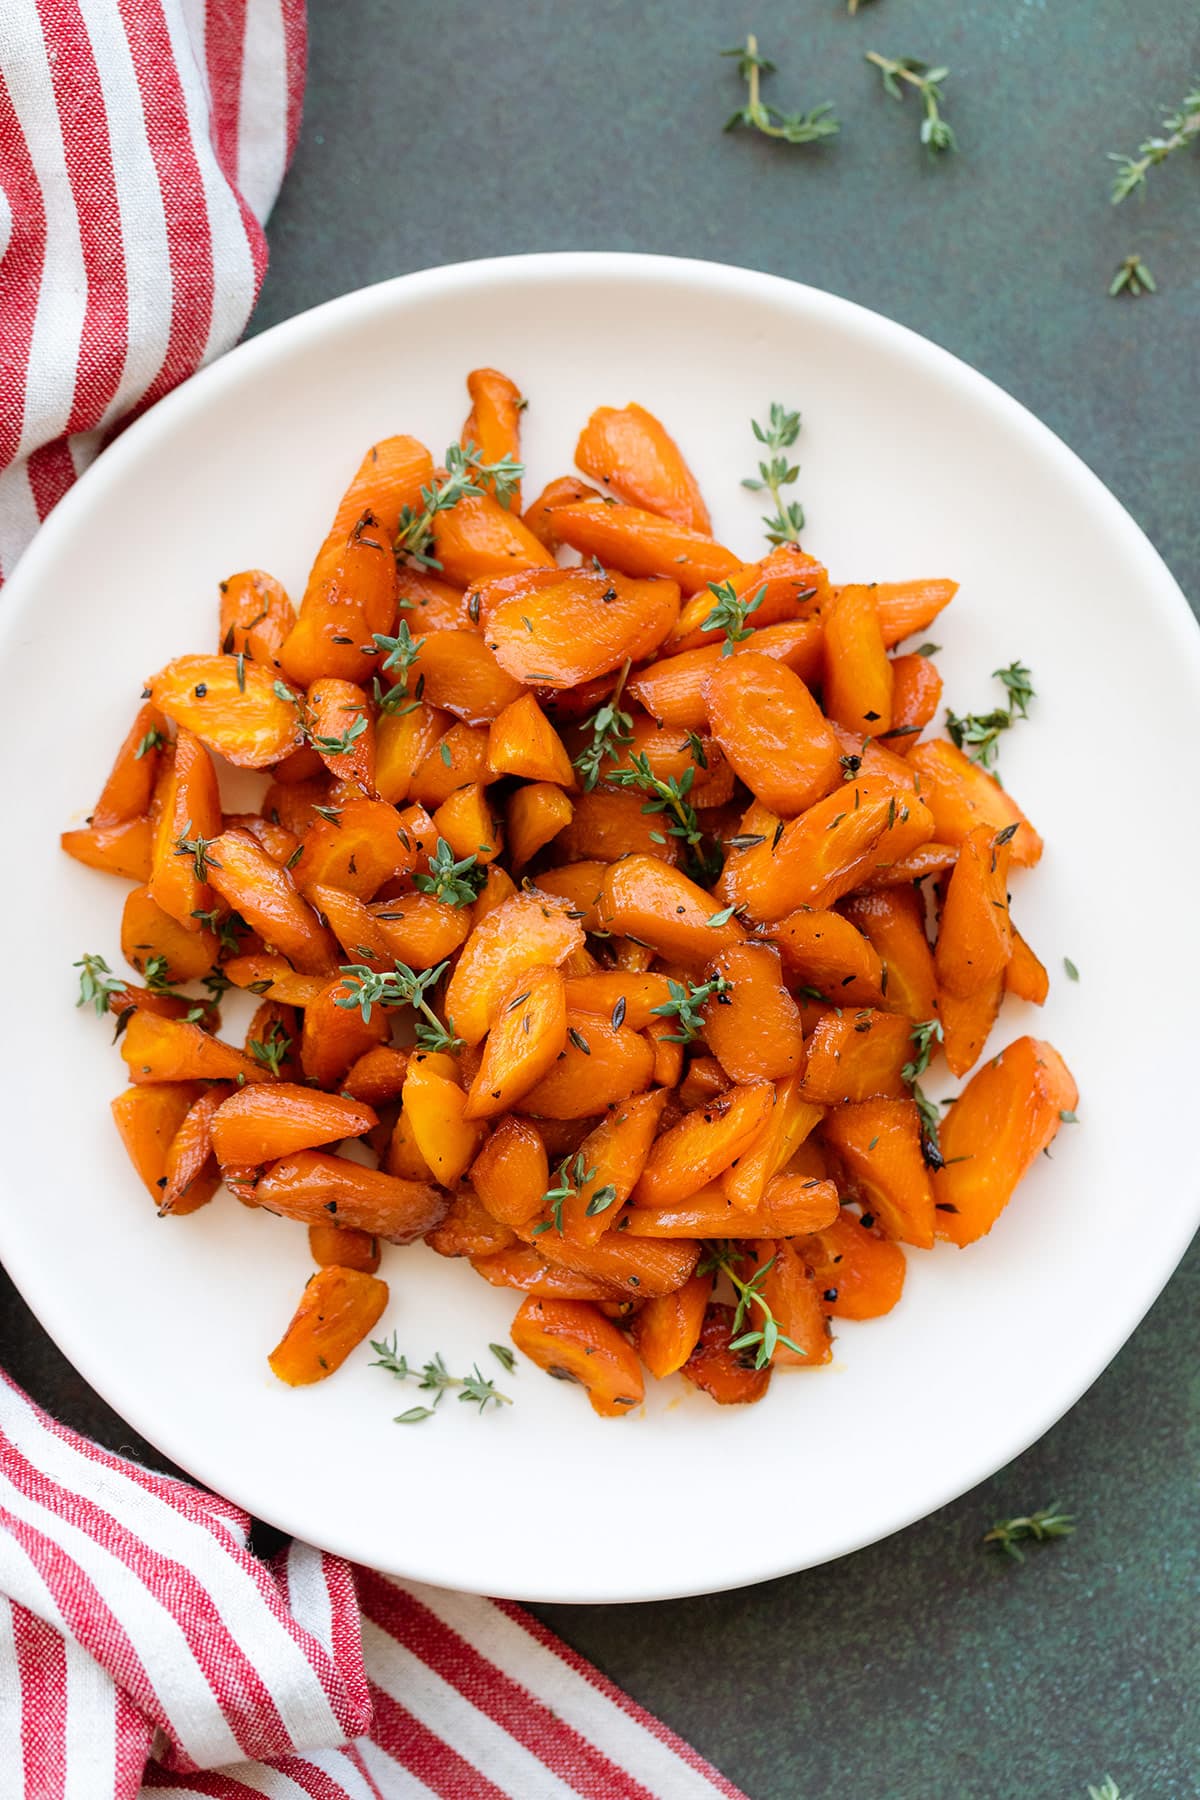 Roasted carrots garnished with fresh thyme on a white plate on a dark green background.